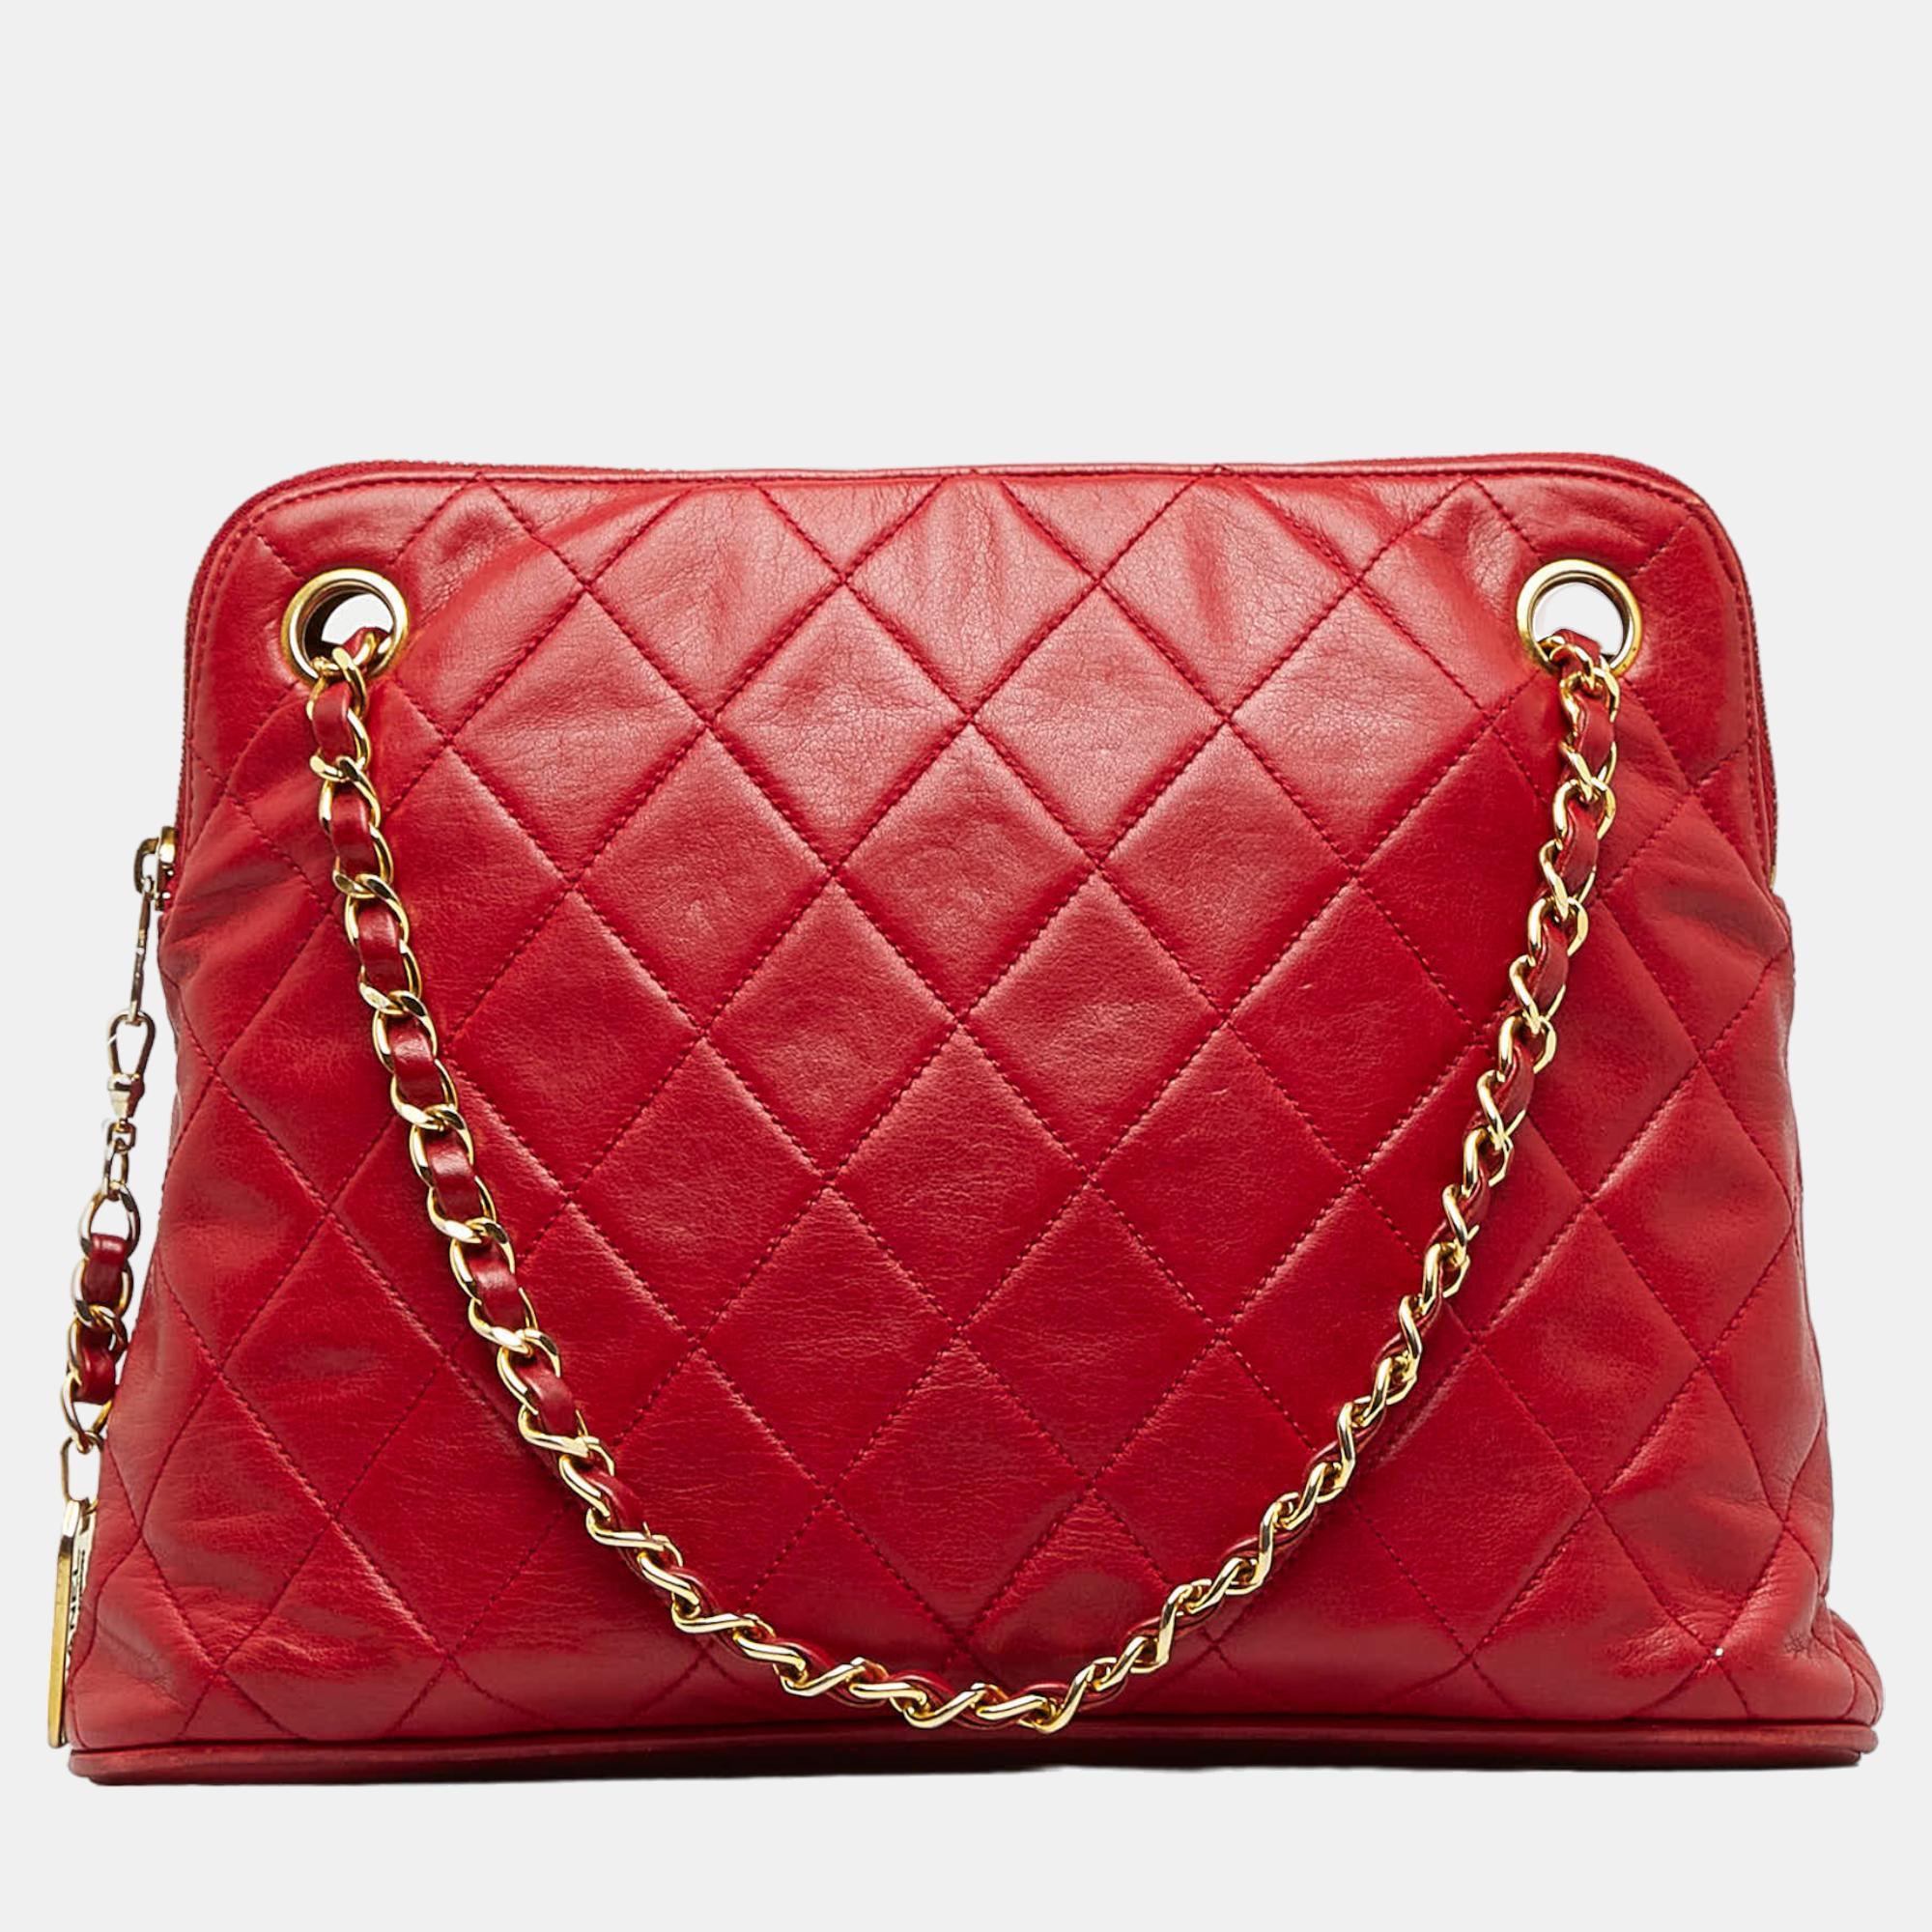 Chanel Red Quilted Lambskin Shoulder Bag